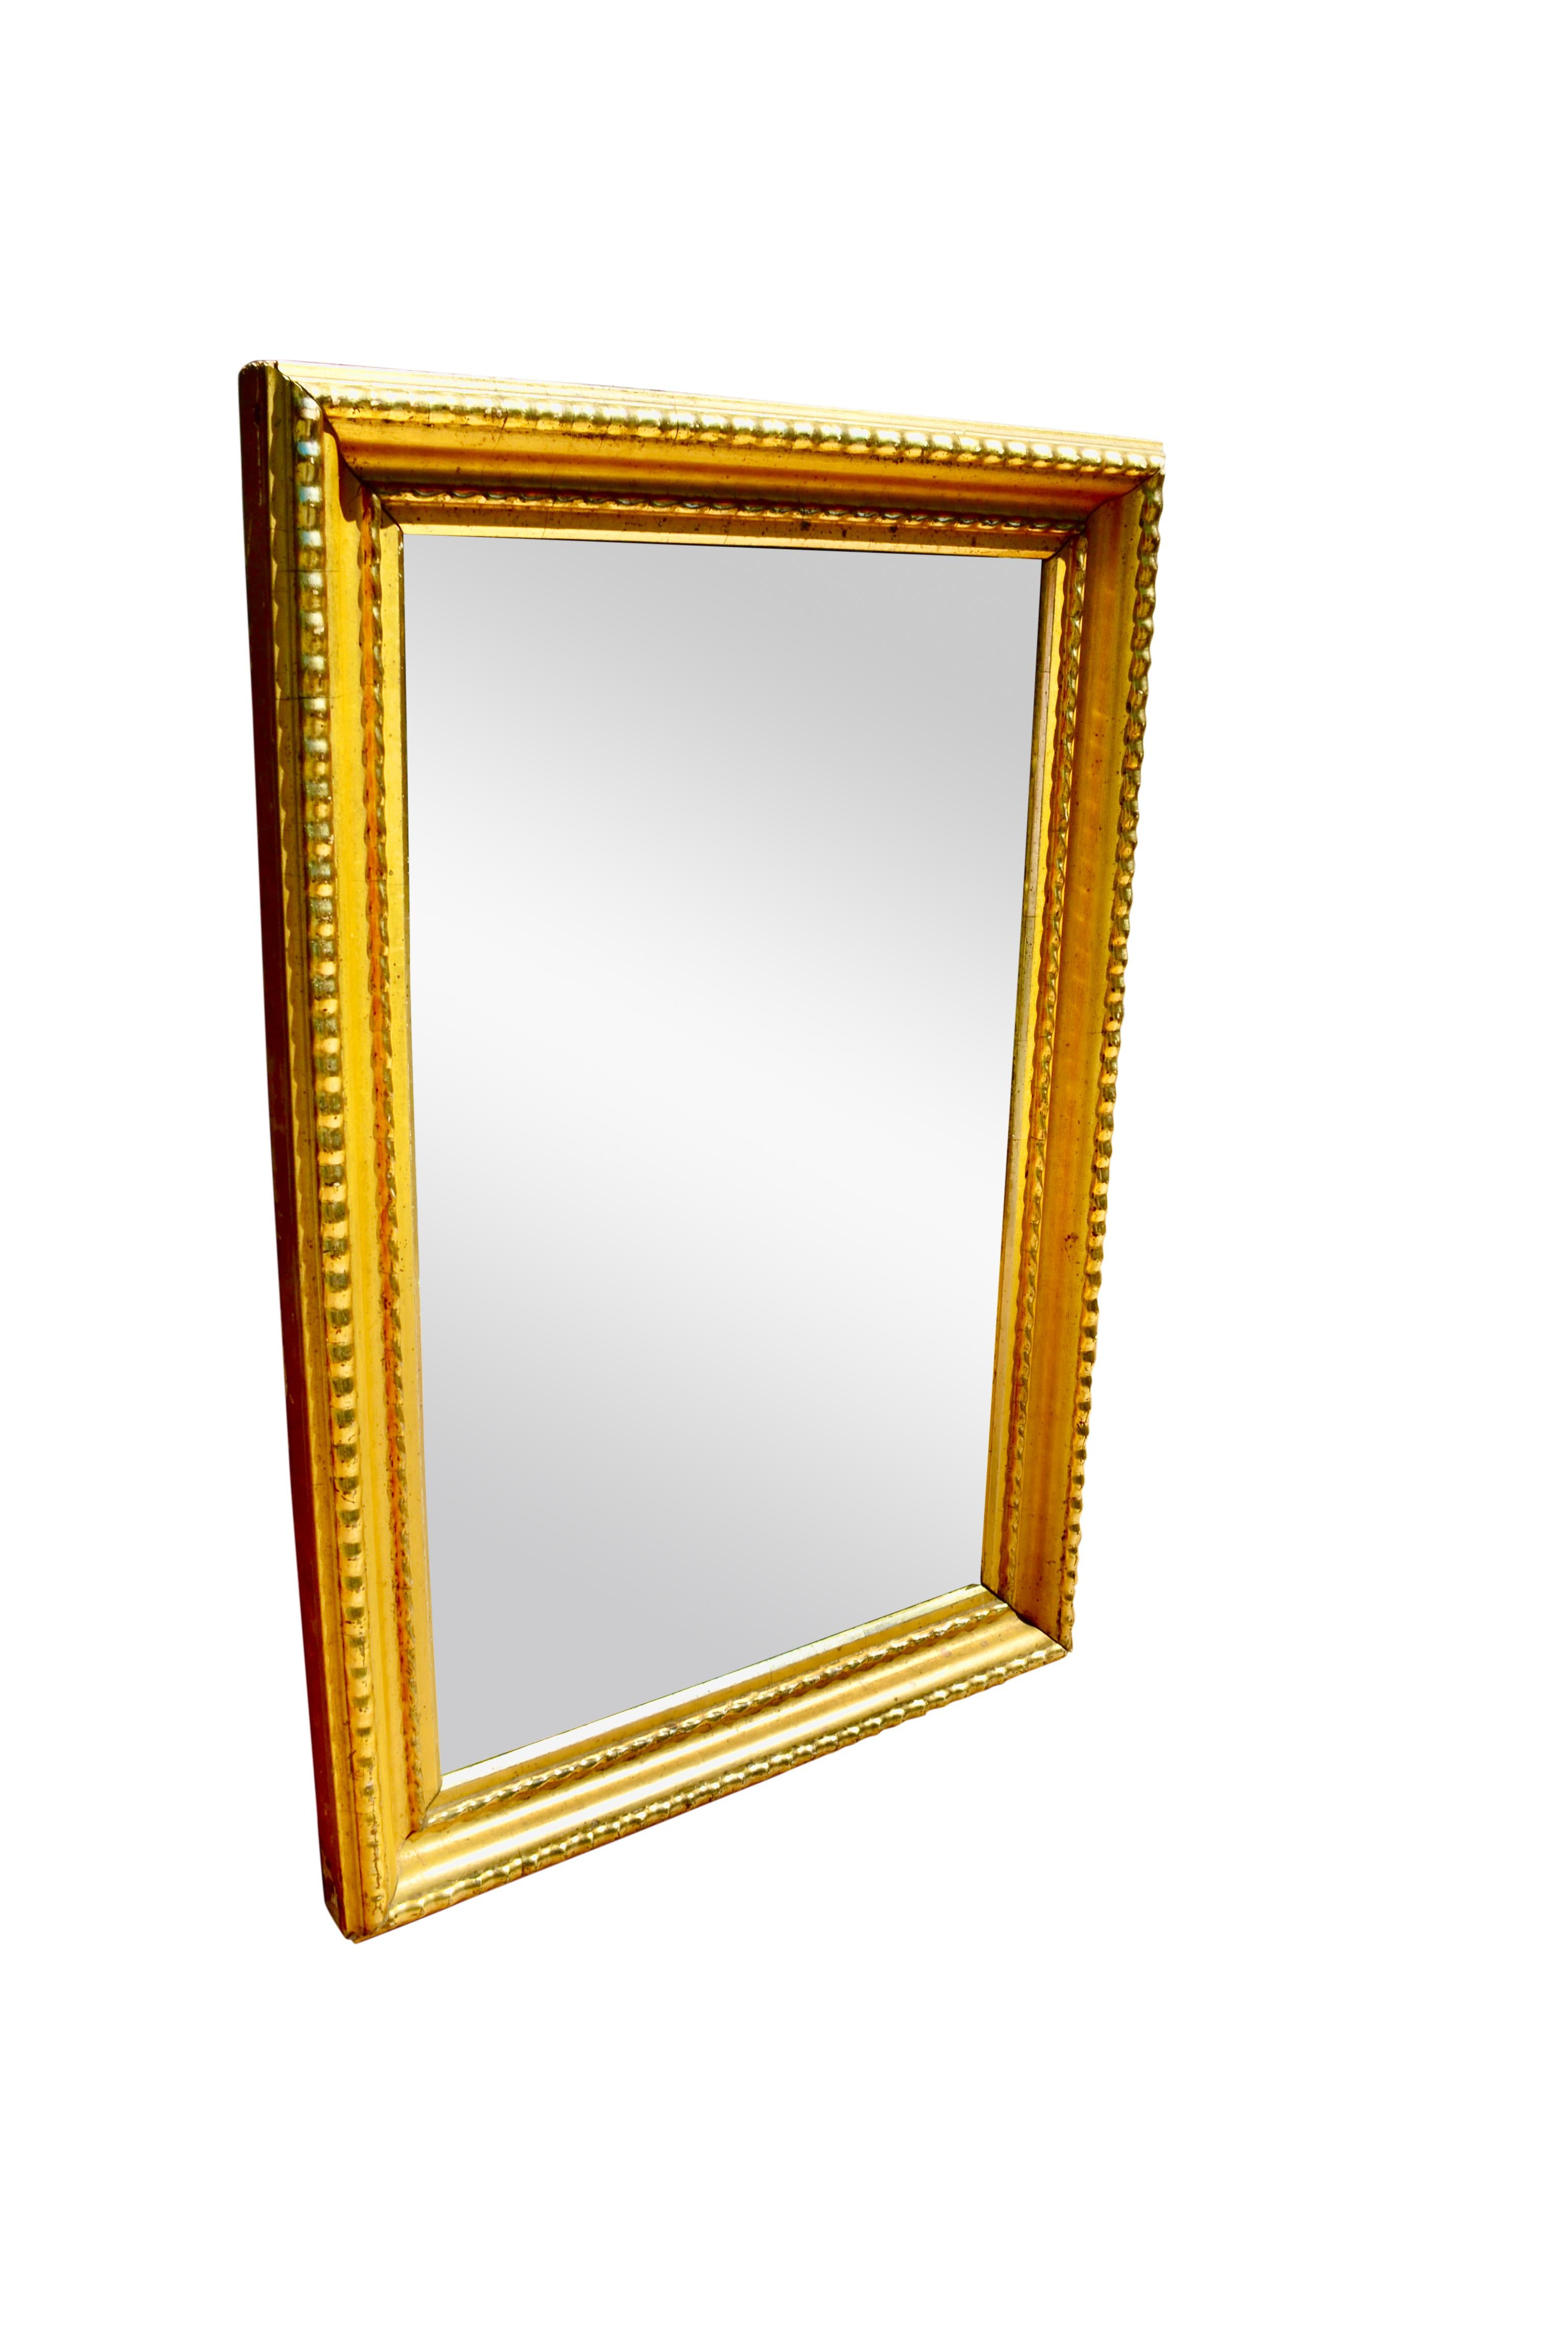 mirror with beveled mirror frame